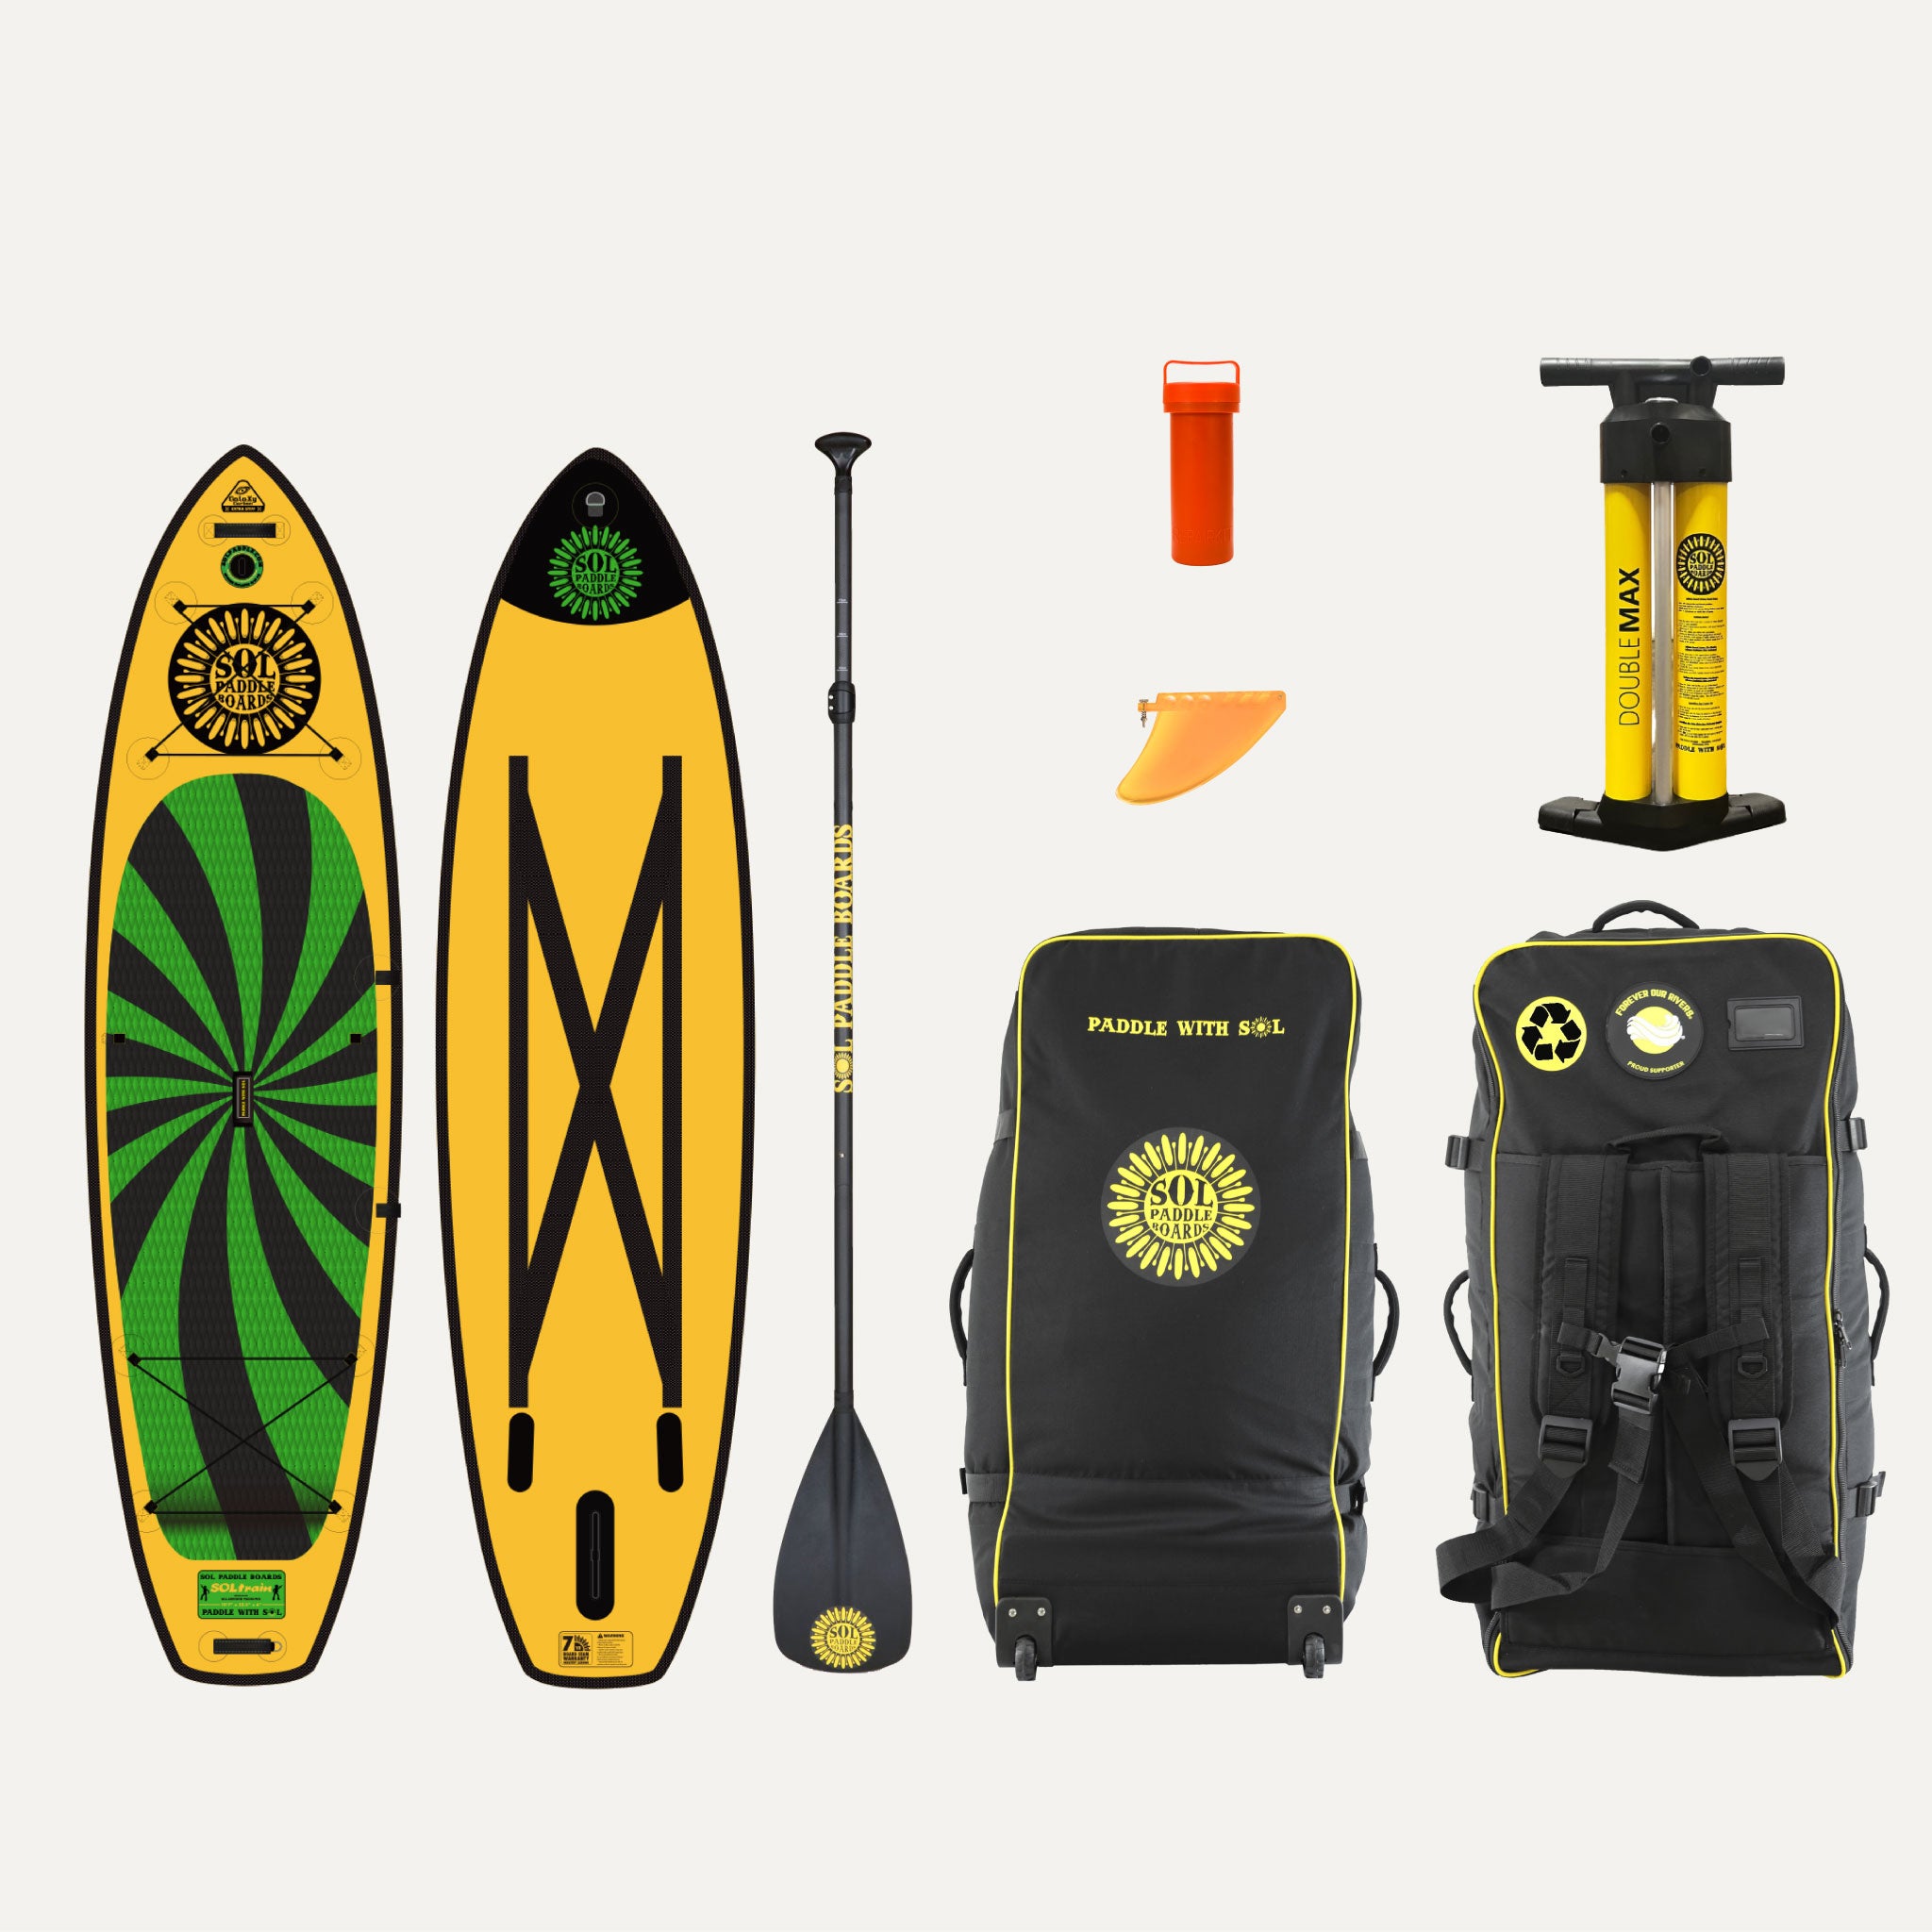 Carbon GalaXy SOLtrain Inflatable Paddle Board showcasing the top and bottom views of the SUP board and the accessories that come with it